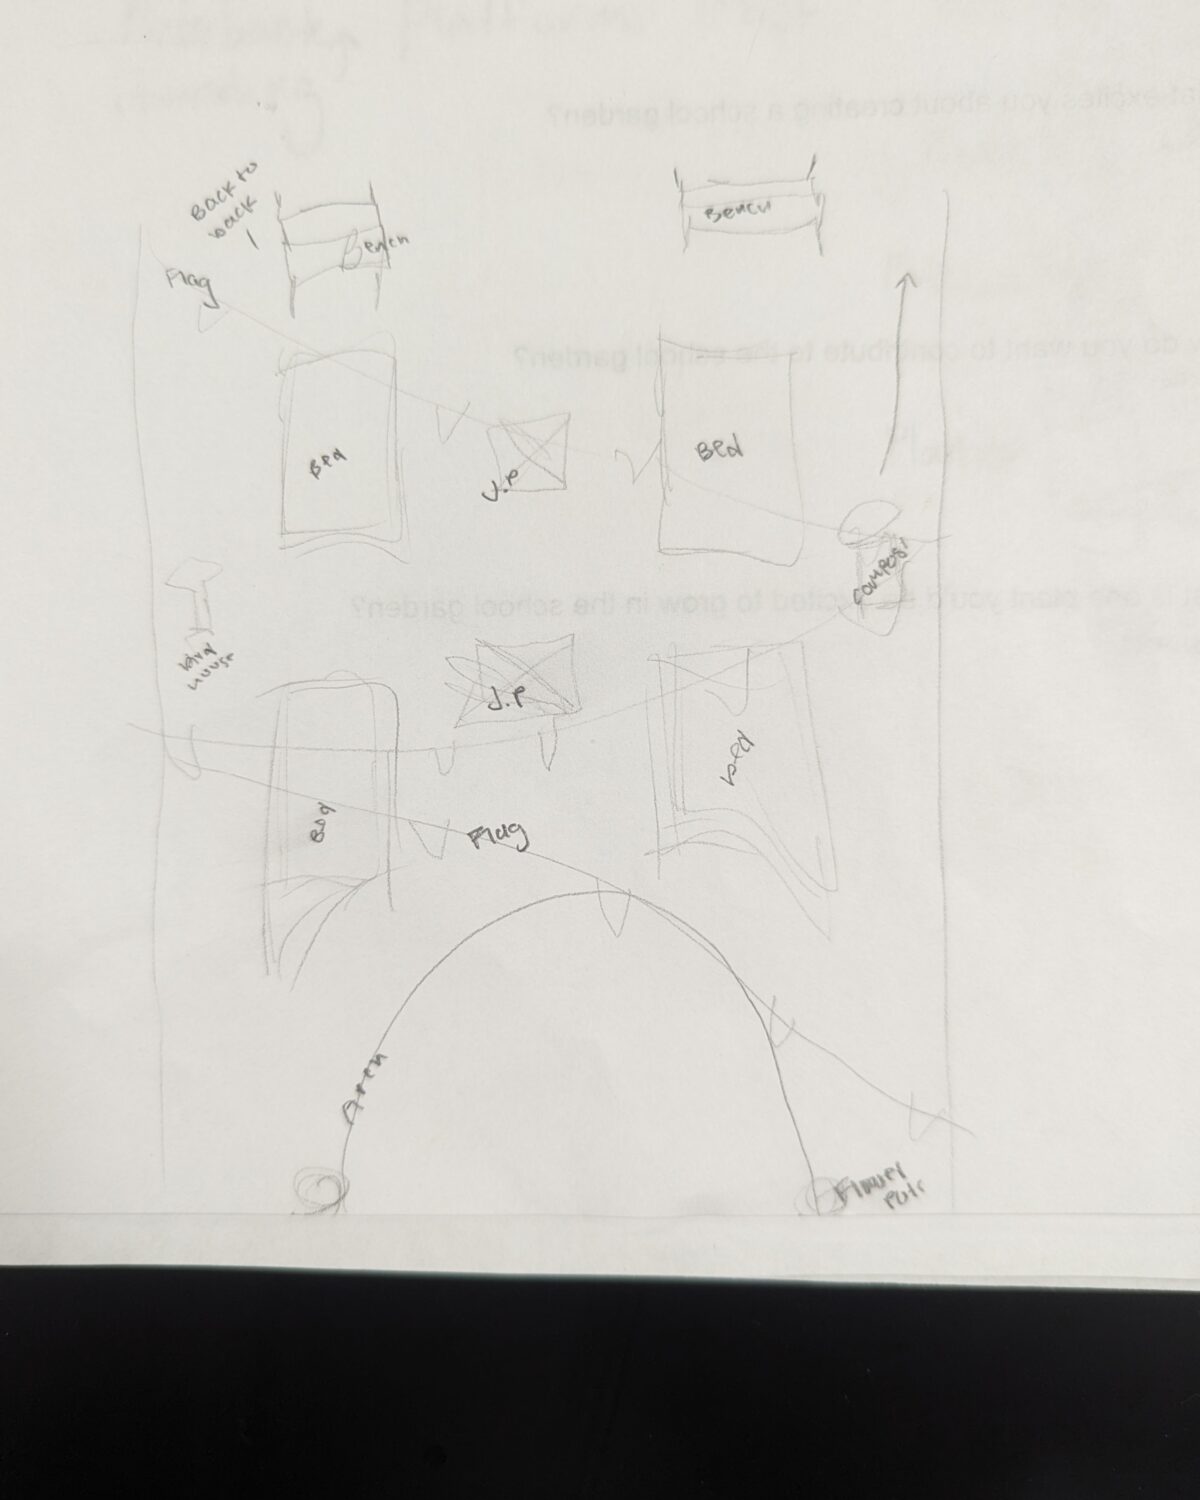 Student sketch showing the plans for a new garden space showing raised beds and an archway.